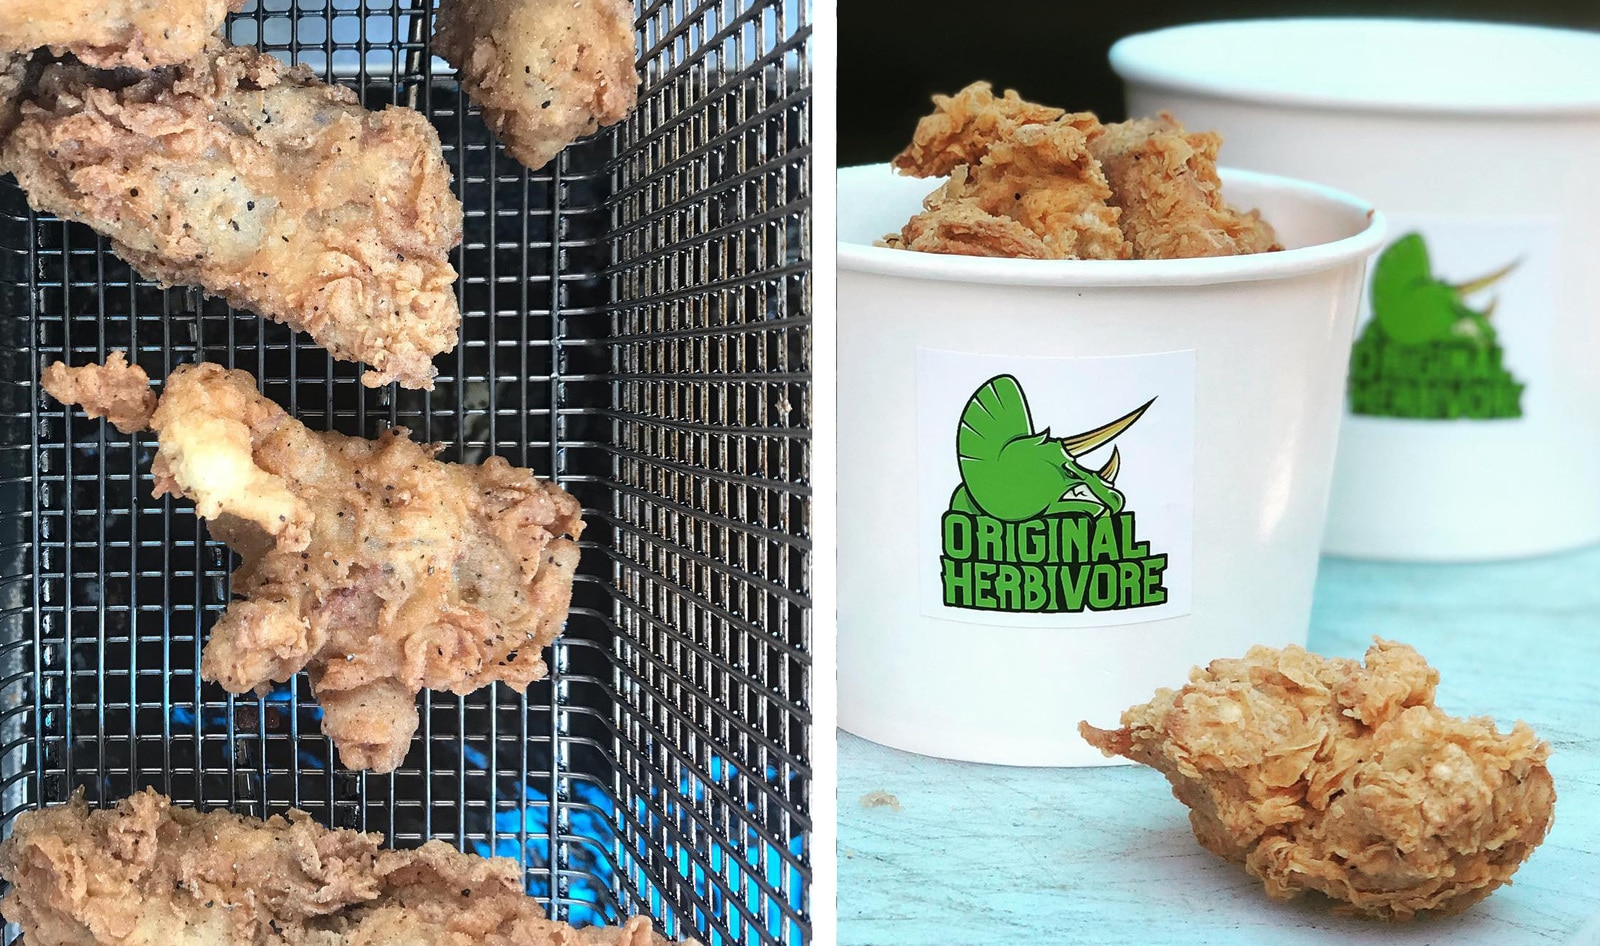 New Vegan Fried Chicken Shop Opens in Southern California